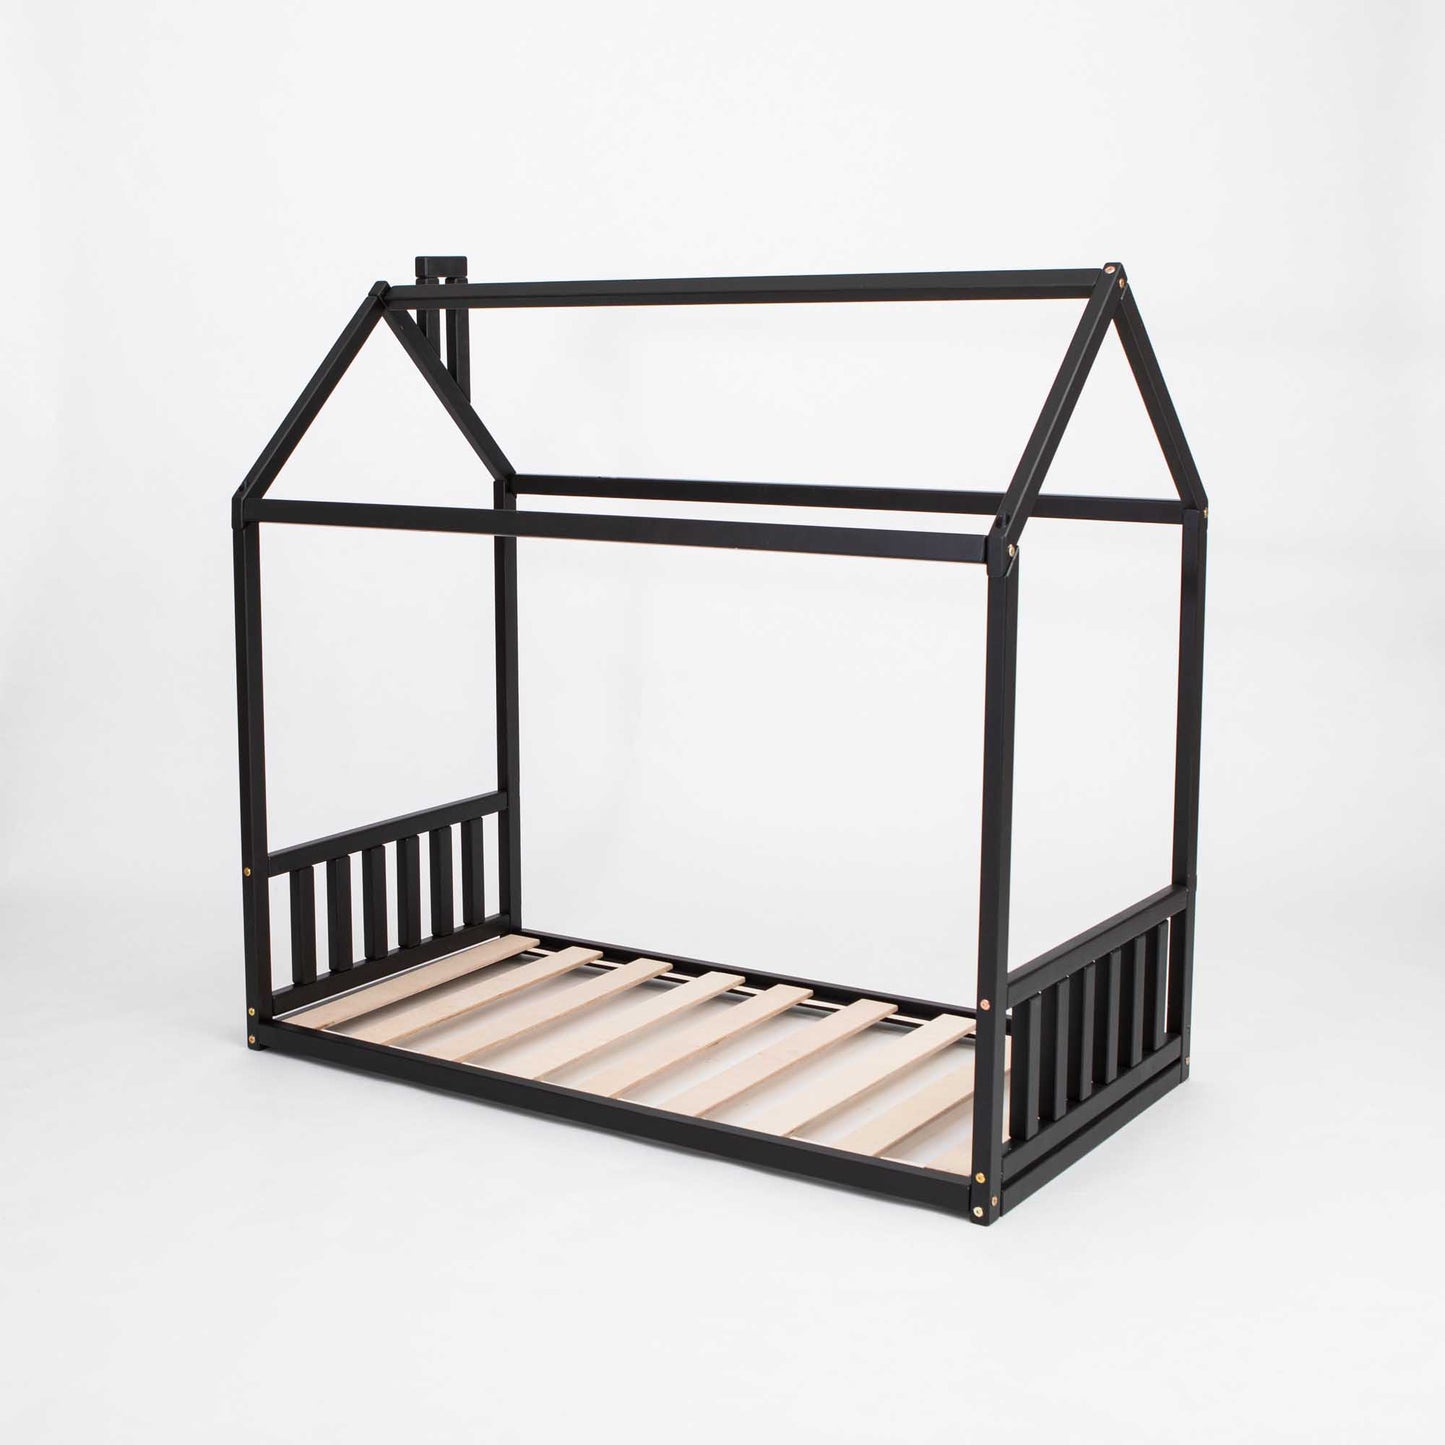 A cozy Sweet Home From Wood Toddler House Bed with a headboard and footboard made of black wooden slats, perfect for a preschooler's sleep haven.